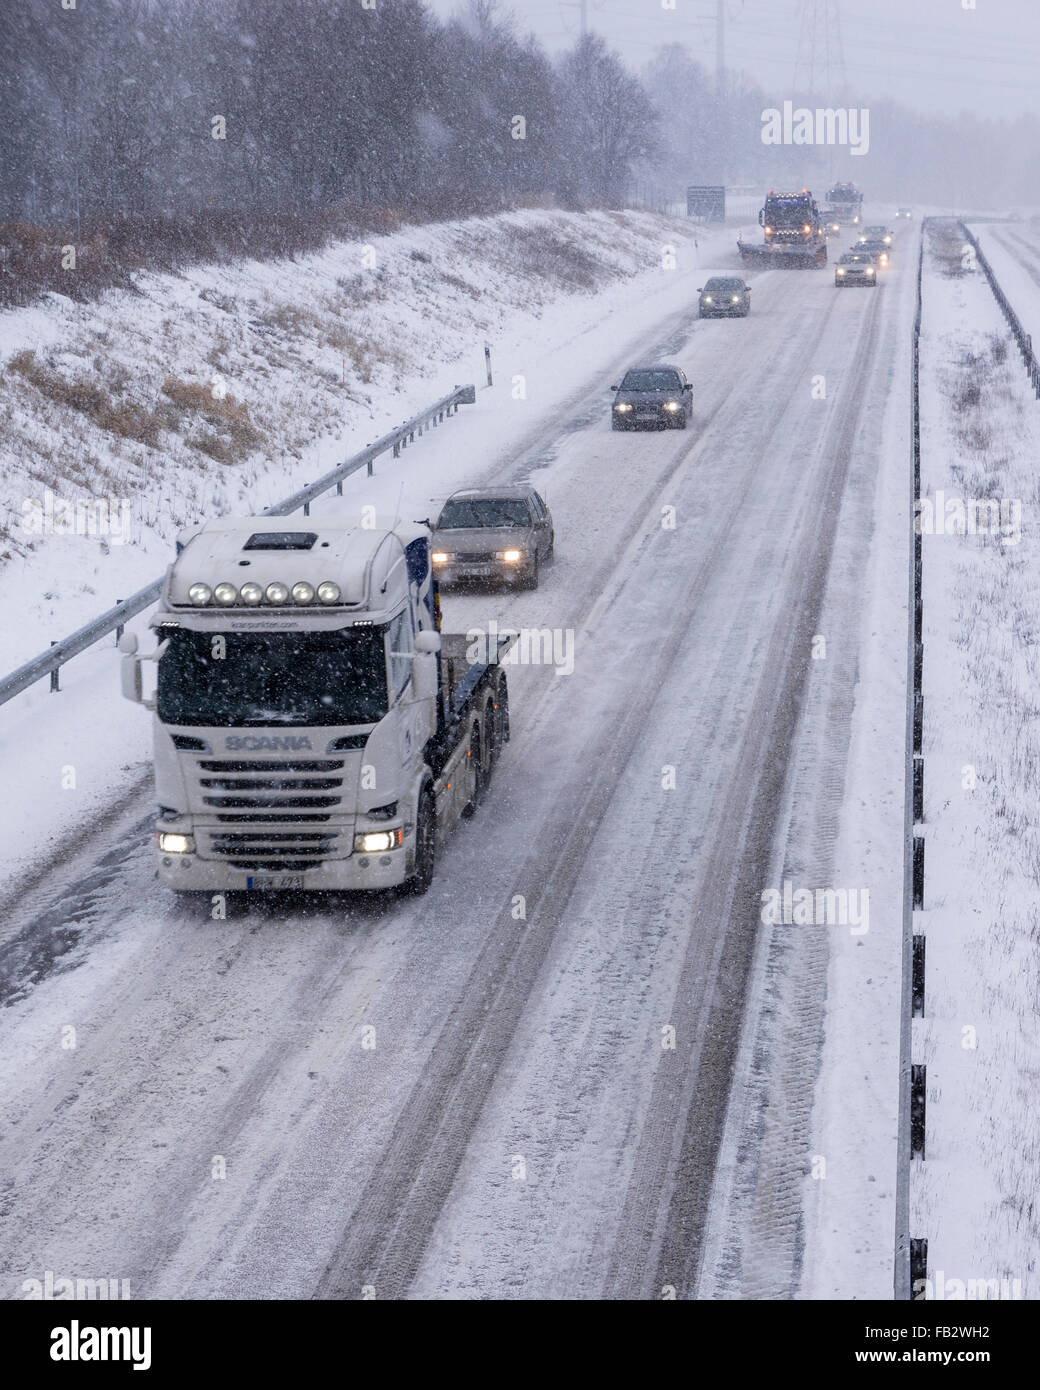 Sweden Weather: E20, Floda, Sweden, 8th Feb 2016. First major snowfall of the year causes traffic accidents and widespread travel disruptions. Snowplows and gritters are deployed to keep E20 motorway open.  Model Release: No.  Property Release: No. Stock Photo